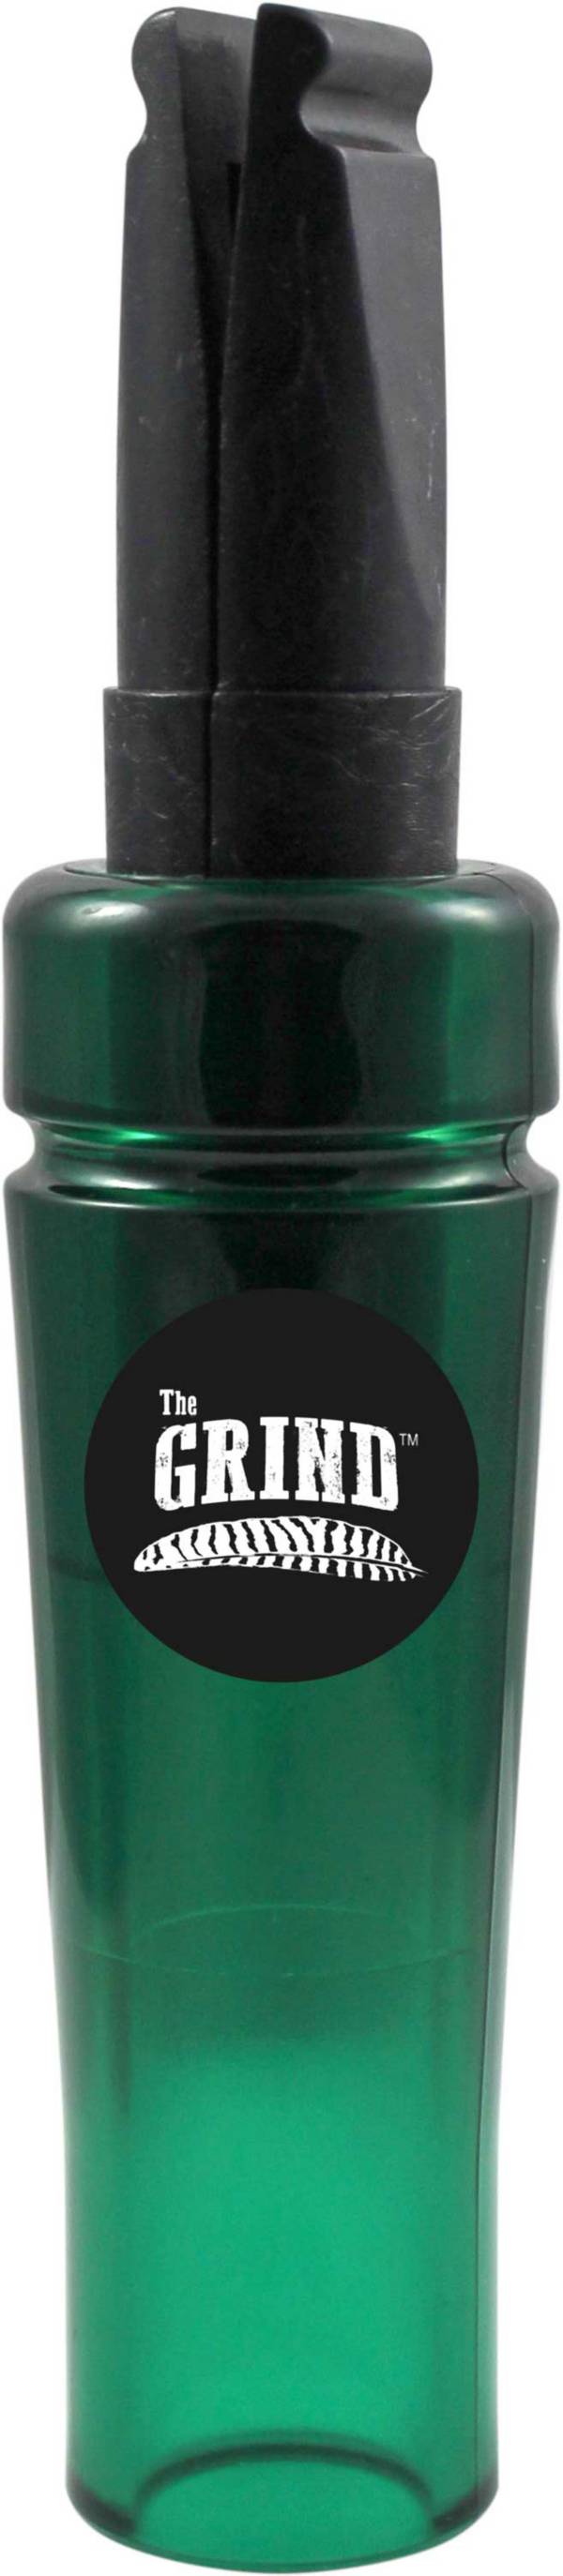 The Grind Outdoors Crow “Caw” II Crow Call product image